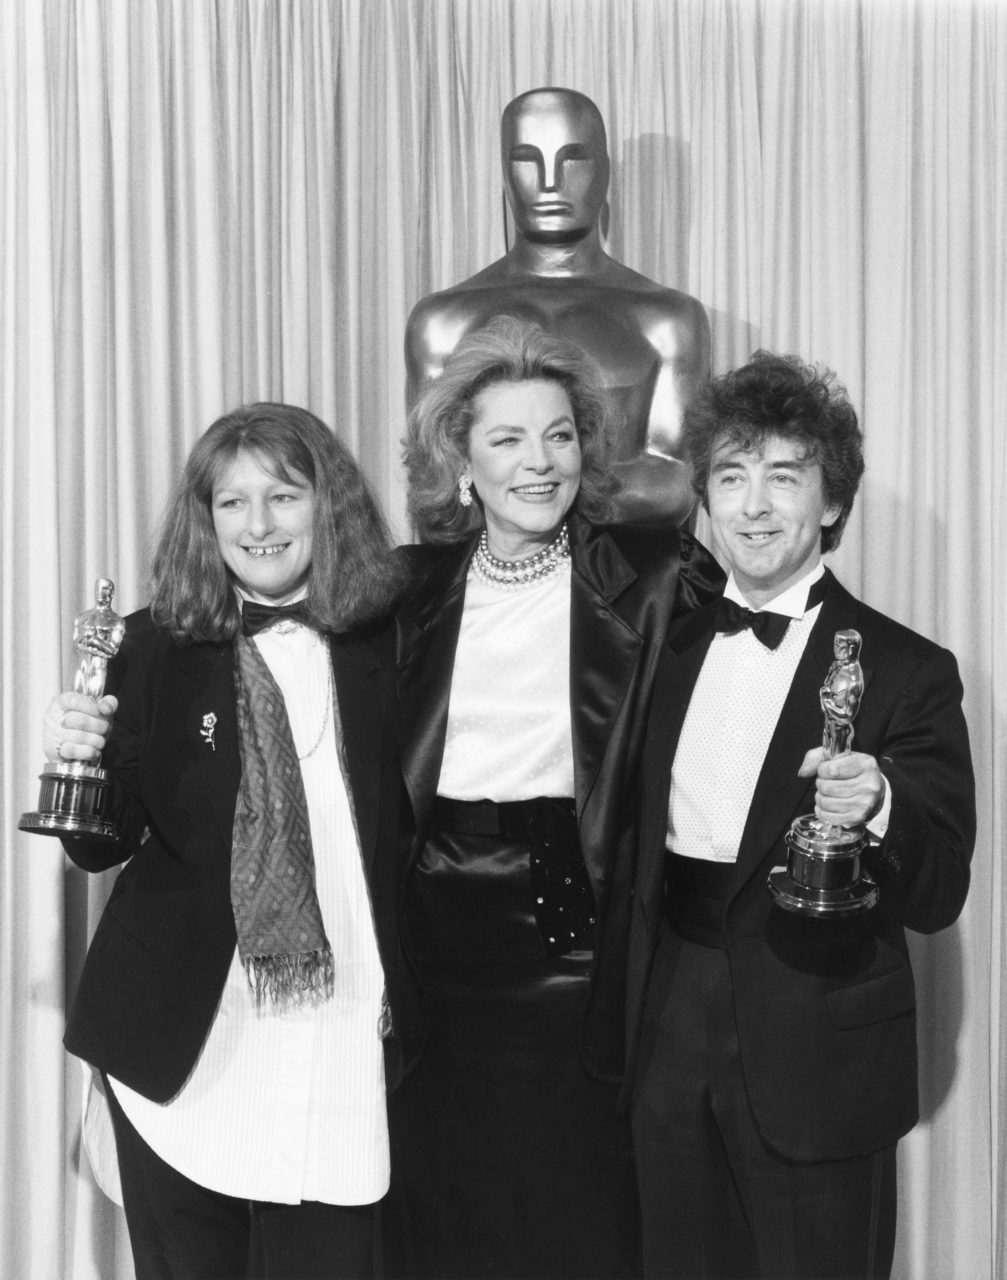 Presenter Lauren Bacall poses with Jenny Beavan and John Bright, who took home the Academy Award for Best Costume Design for their work on A Room With a View (1986)